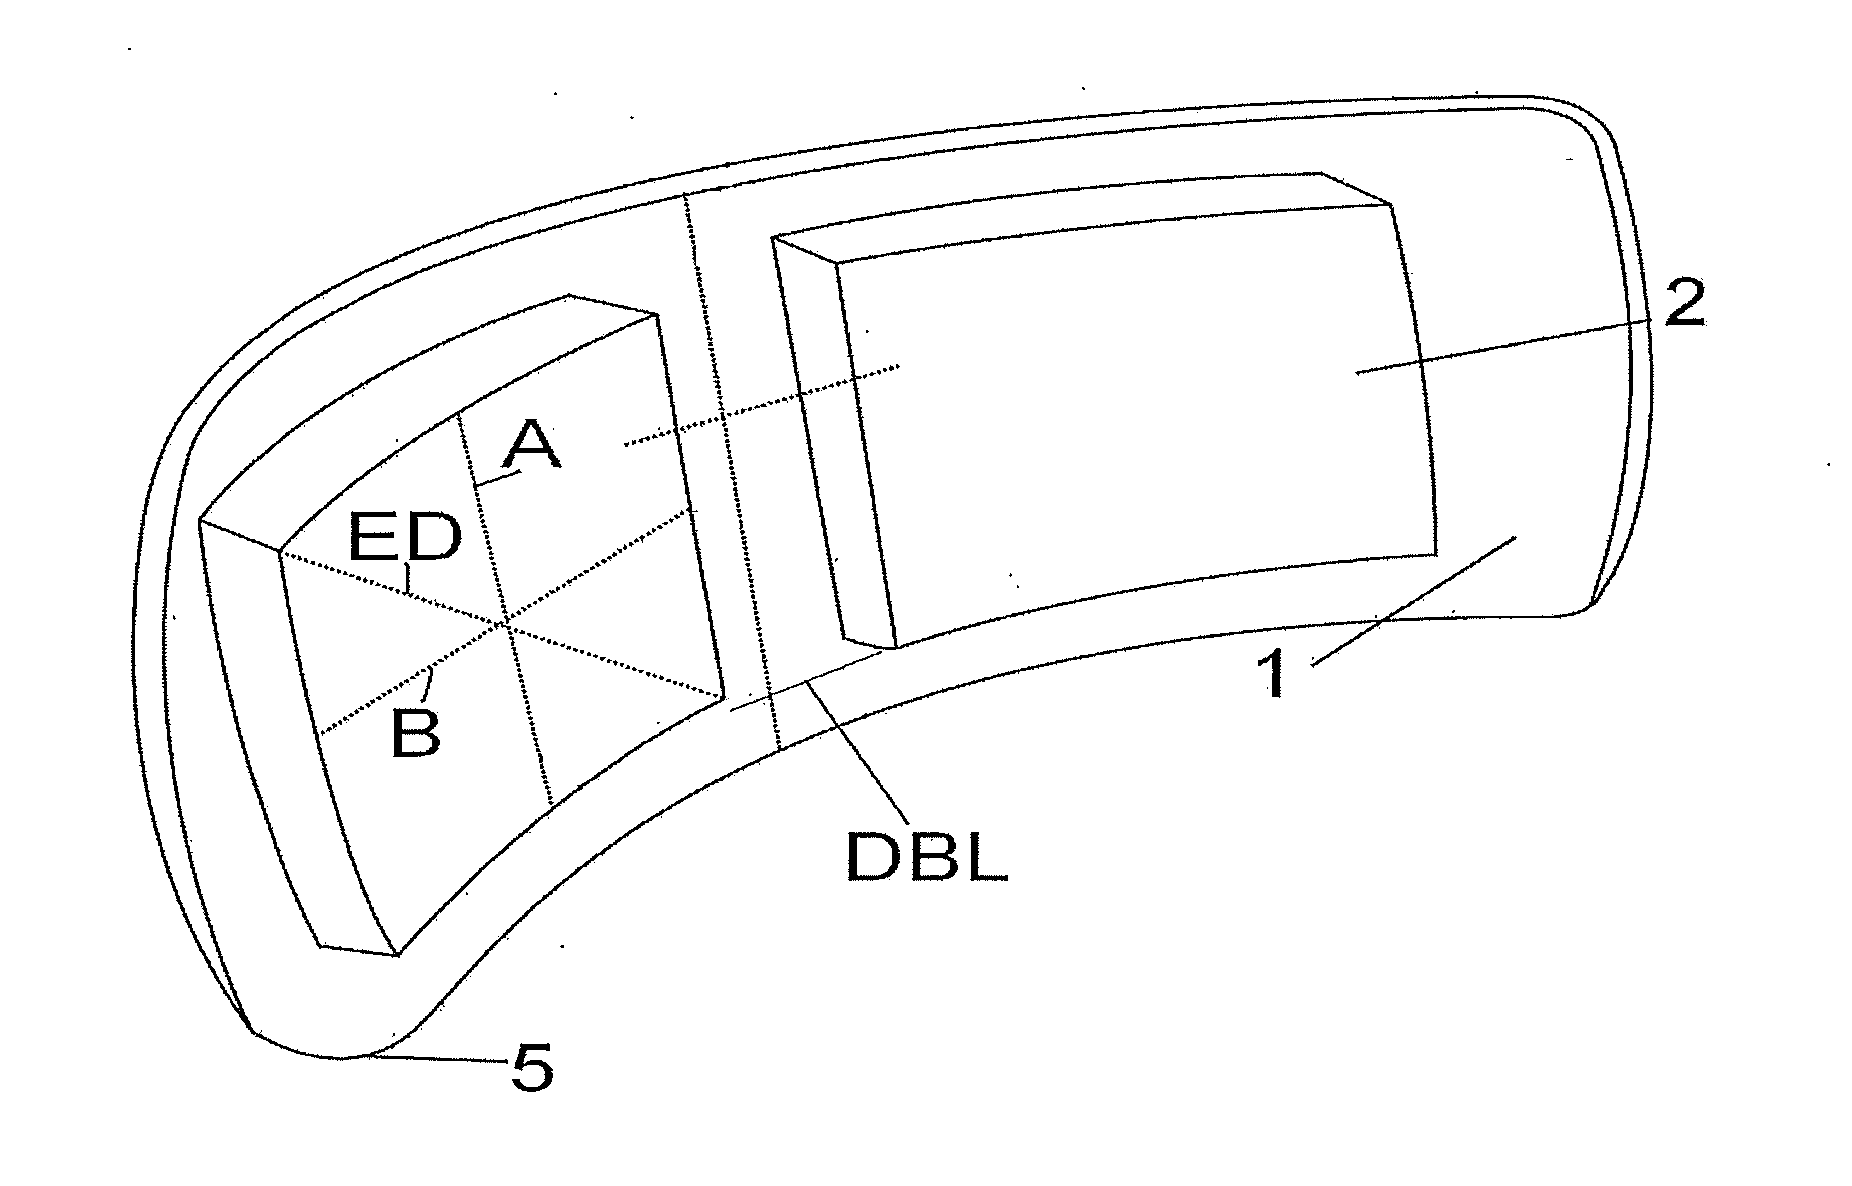 One-piece lens with surplus inner optical material